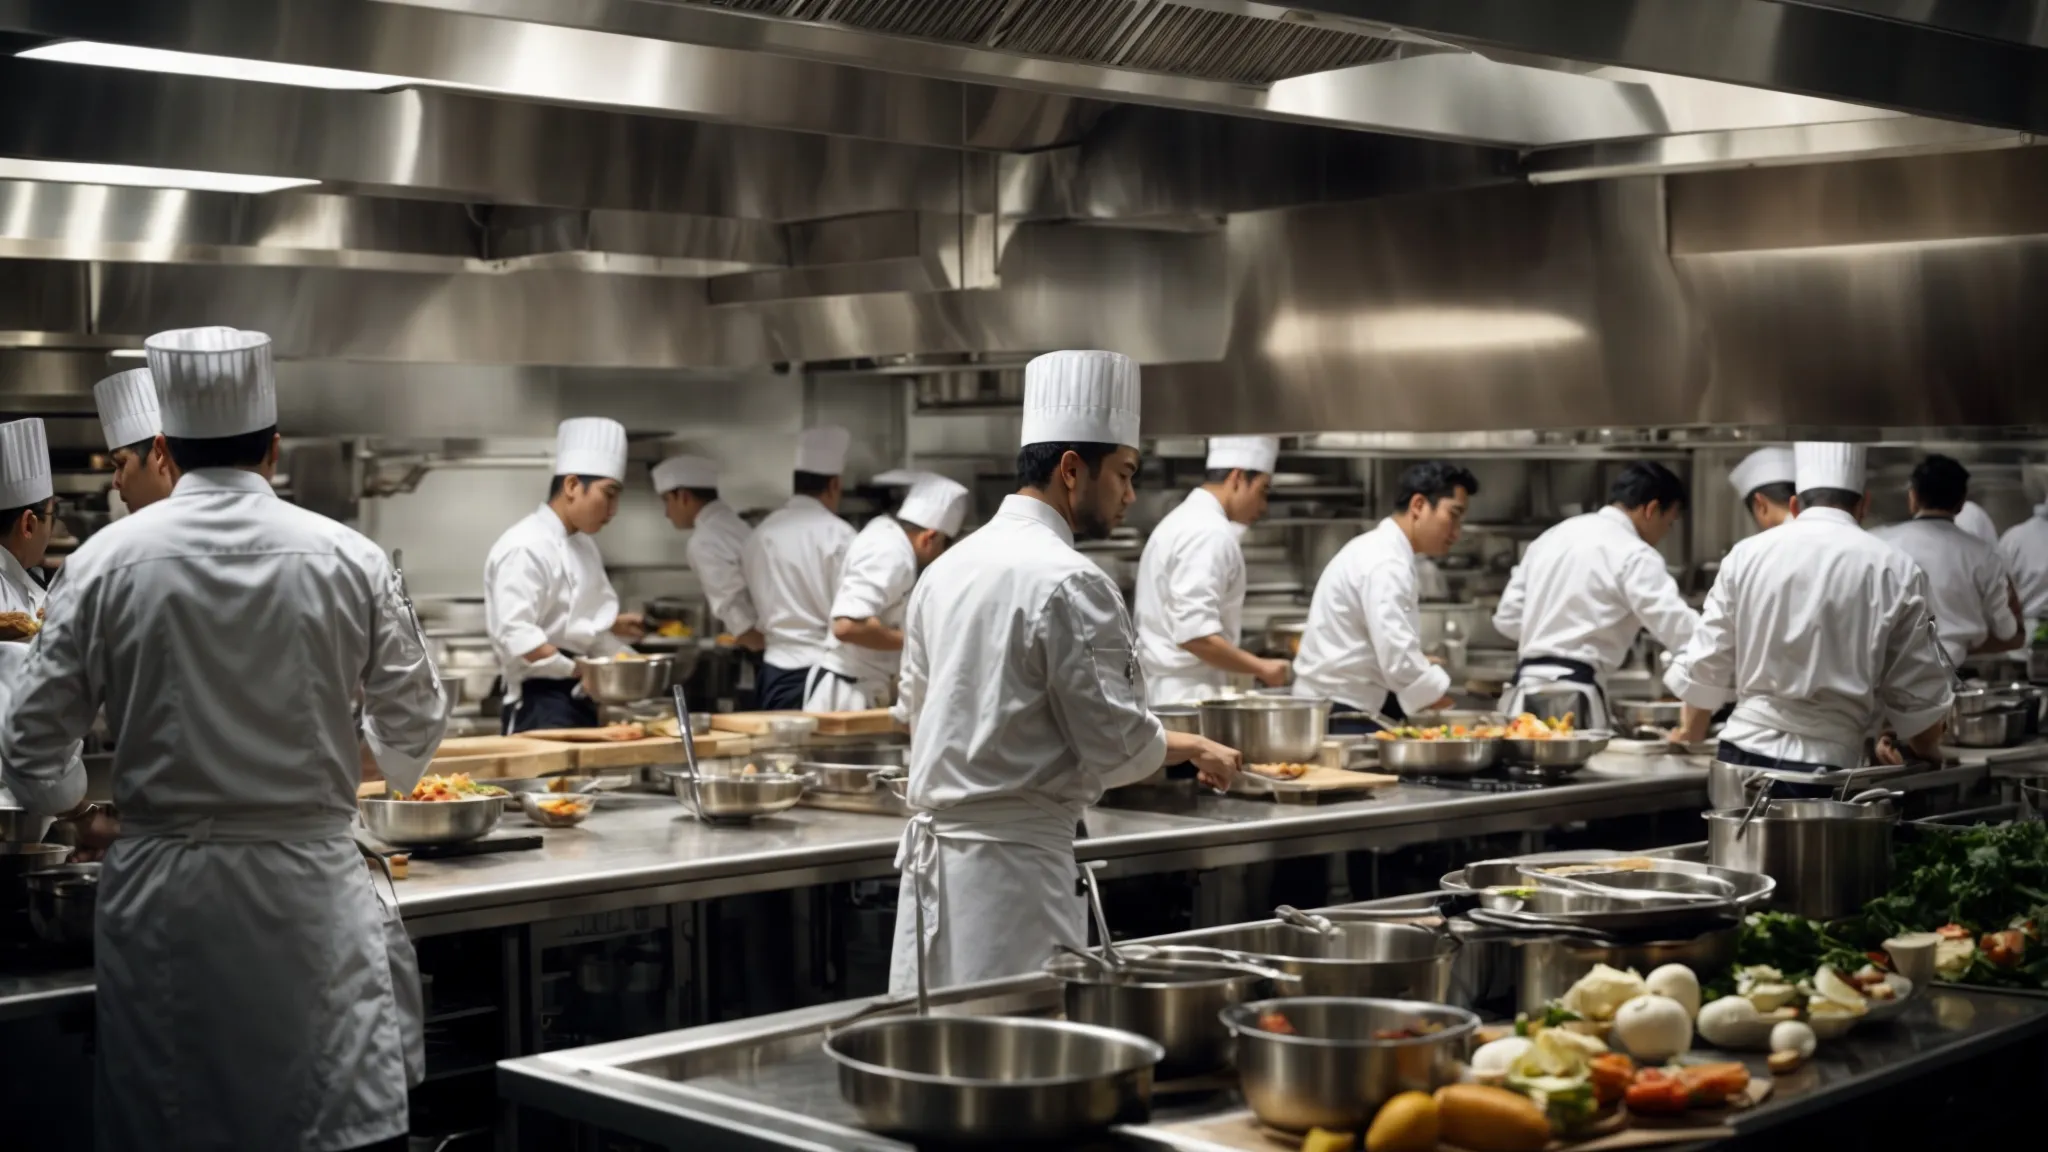 a bustling professional kitchen teeming with chefs and cooking stations, all operating smoothly without disruption.